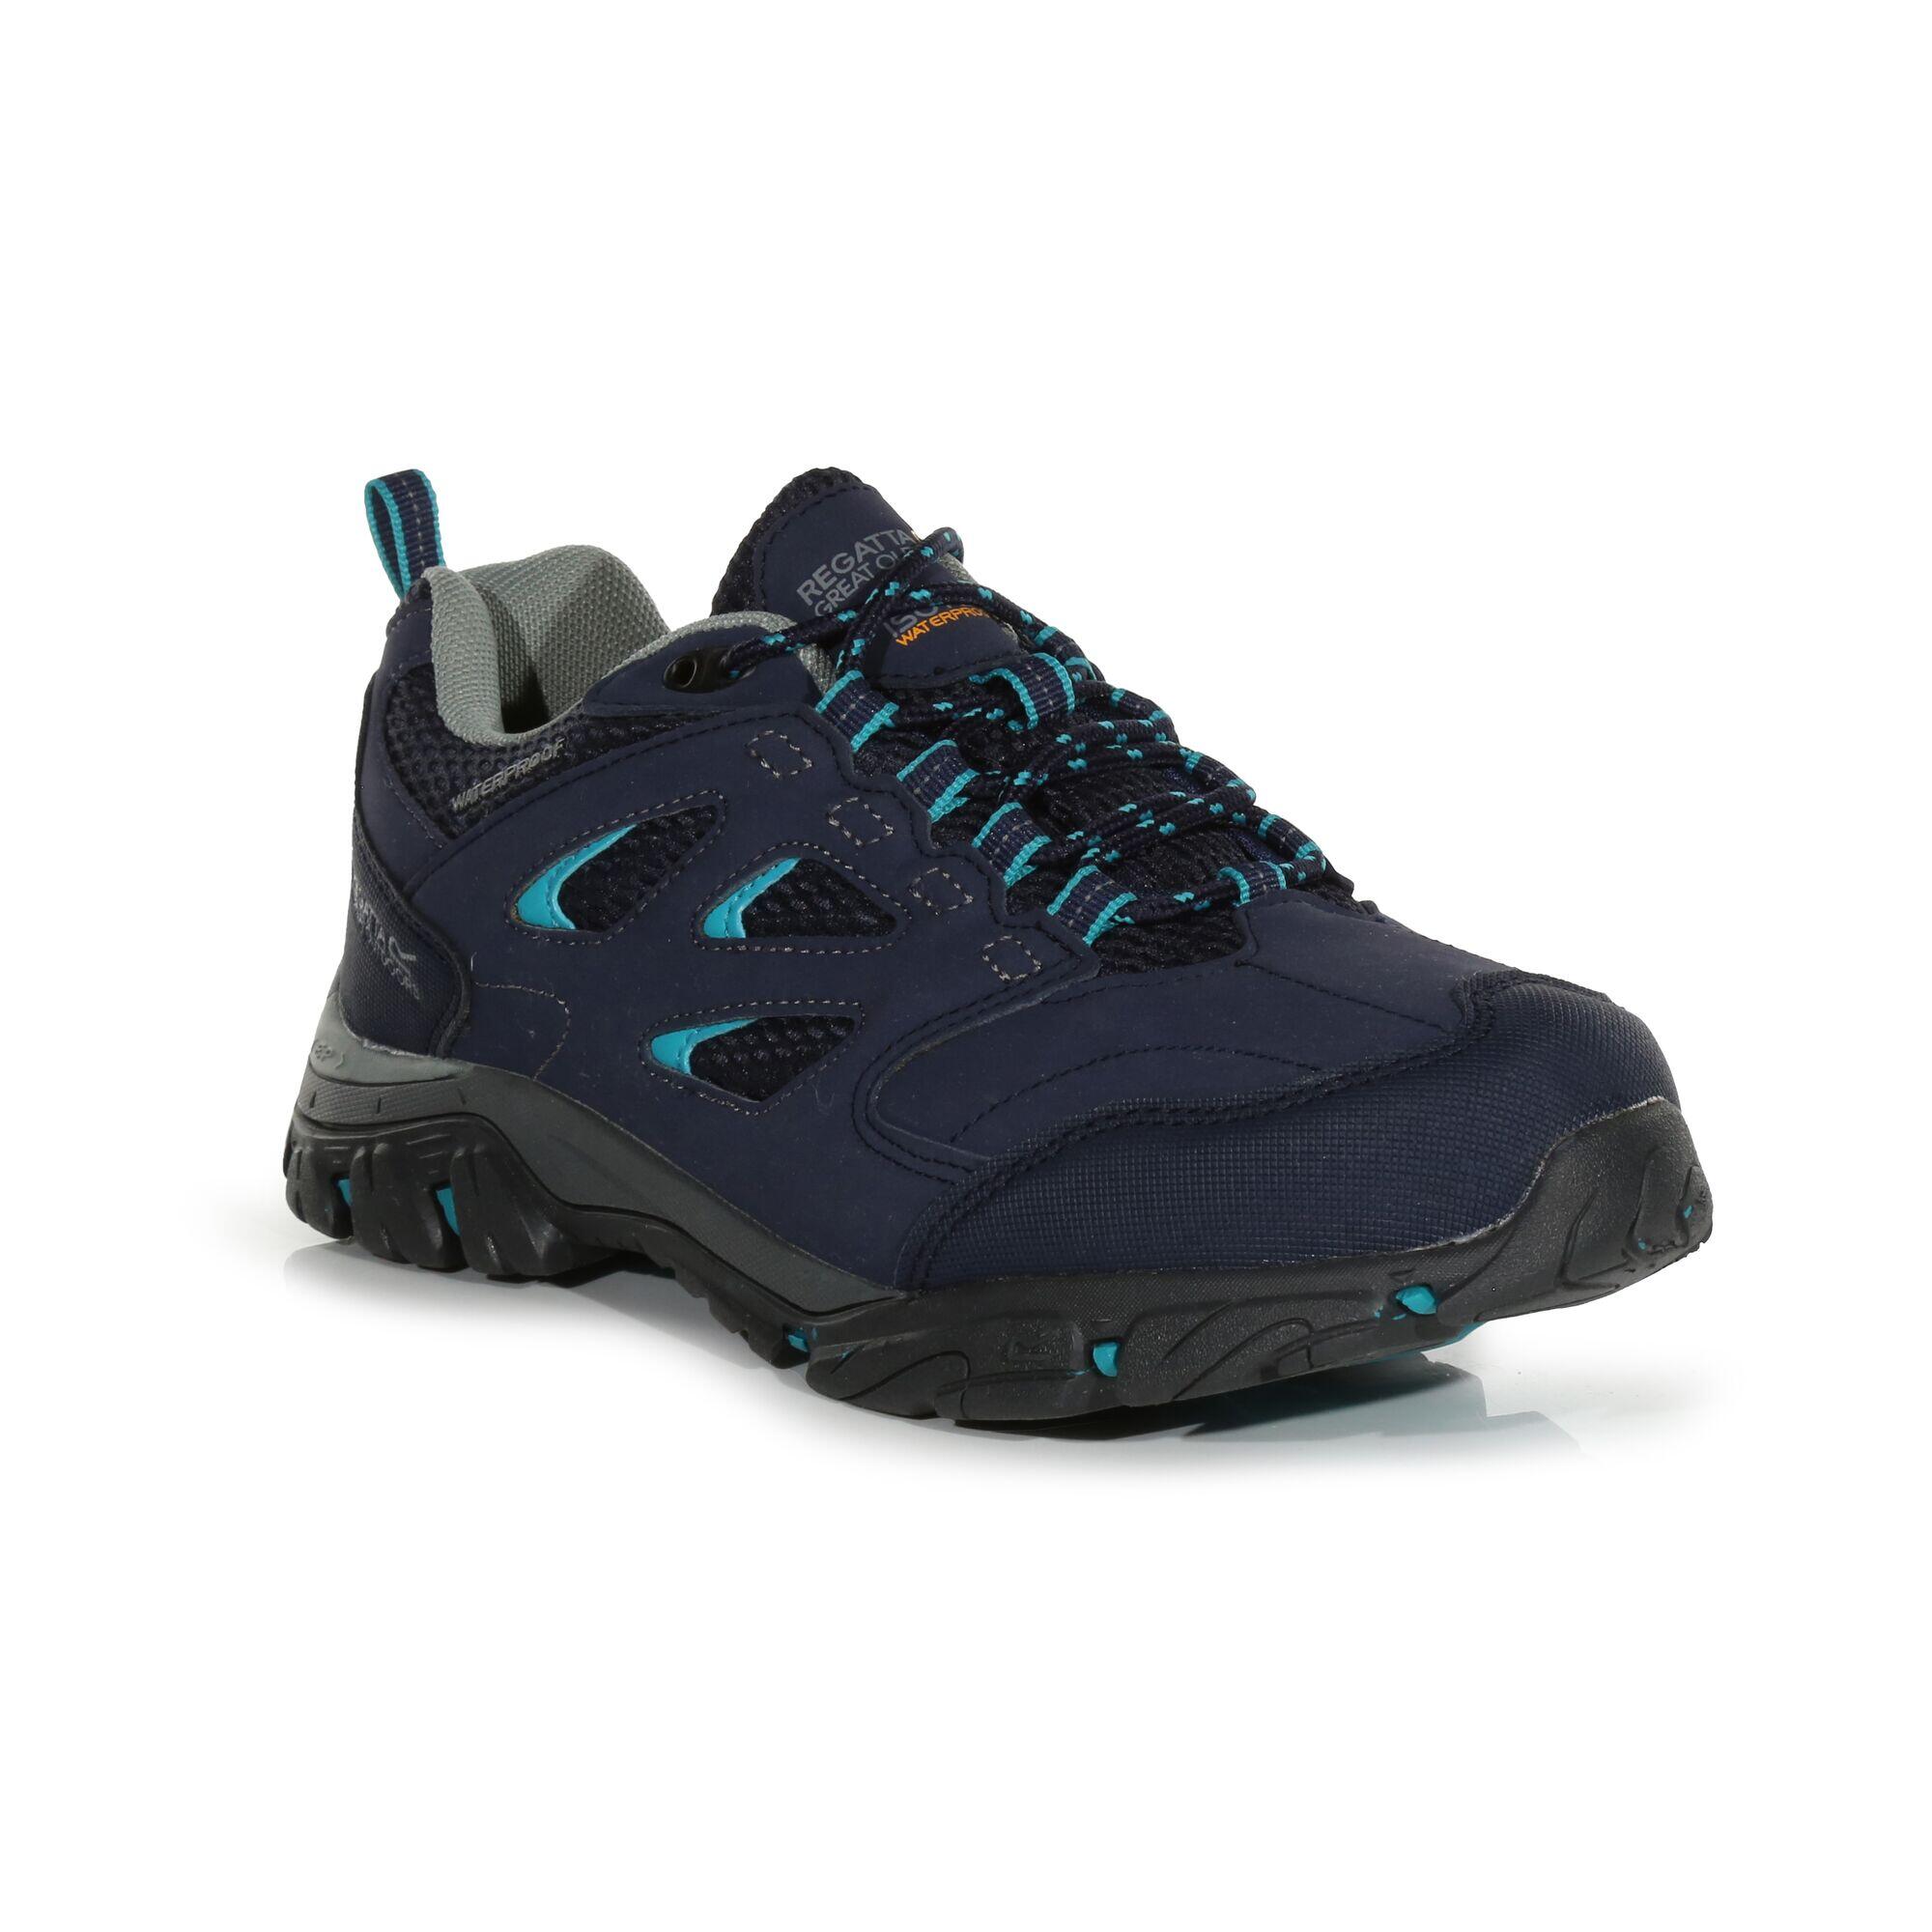 Lady Holcombe IEP Low Women's Hiking Boots - Navy 2/5